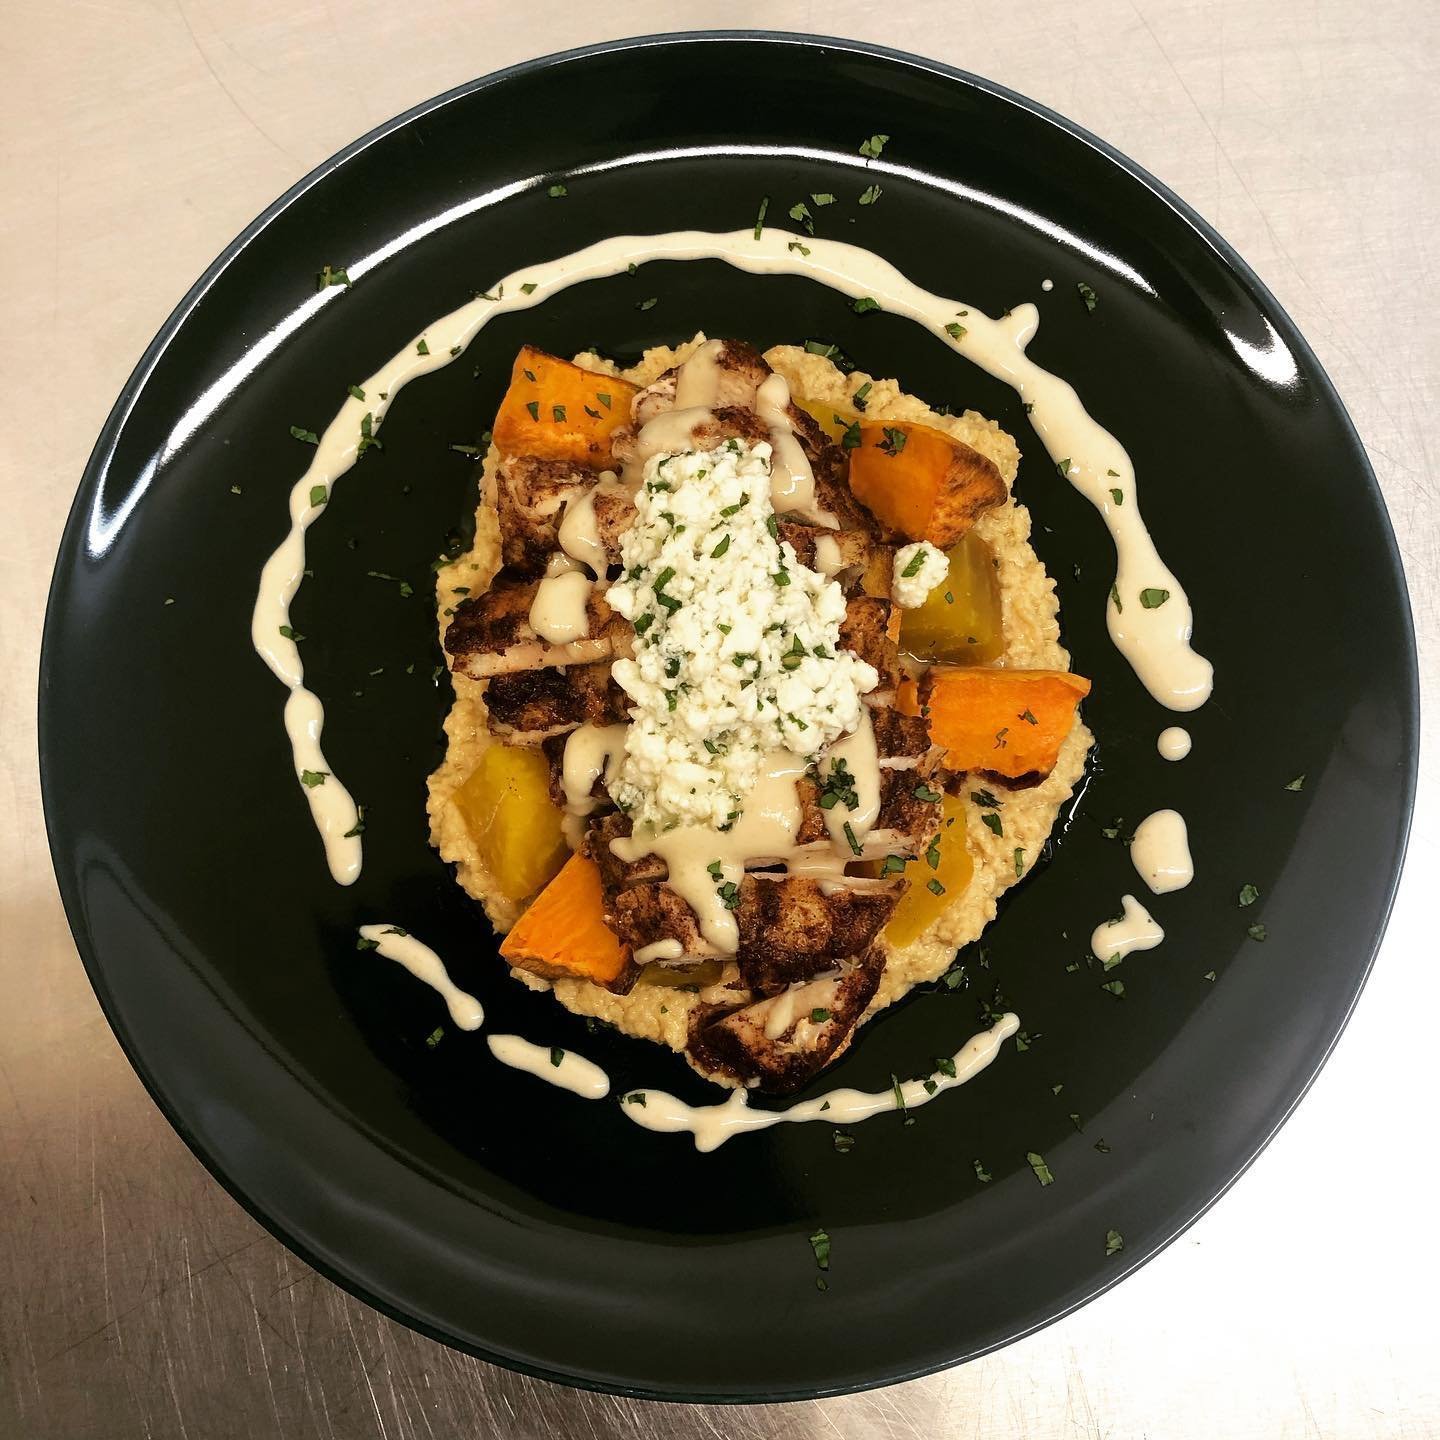 Soggy days call for warm, comforting meals, and our Mediterranean Chicken is just the ticket! Roast chicken supreme, hummus, sweet potato, roast beets, lemon-maple tahini &amp; feta-mint sauce. It has no direct contact with wheat/gluten, and it's fea